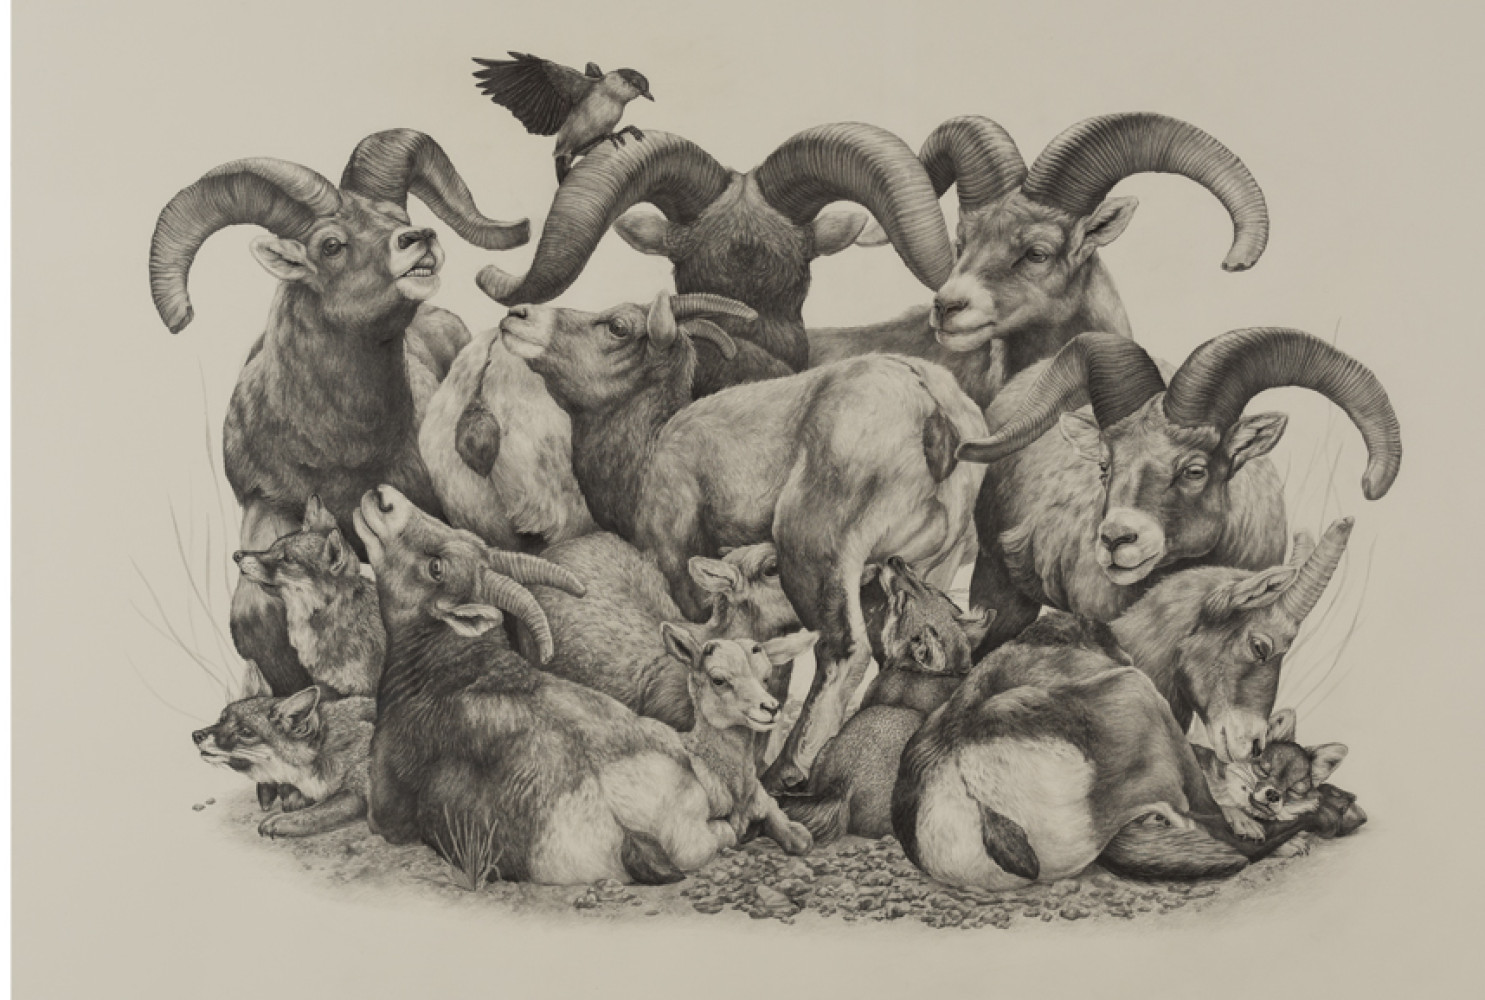 Zoe Keller (United States, b. 1989), Prey, 2016. Graphite on paper. 30 × 42 inches. Purchased with funds generously donated by Dick and Val Beck, National Museum of Wildlife Art. © Zoe Keller. M2017.005.002 